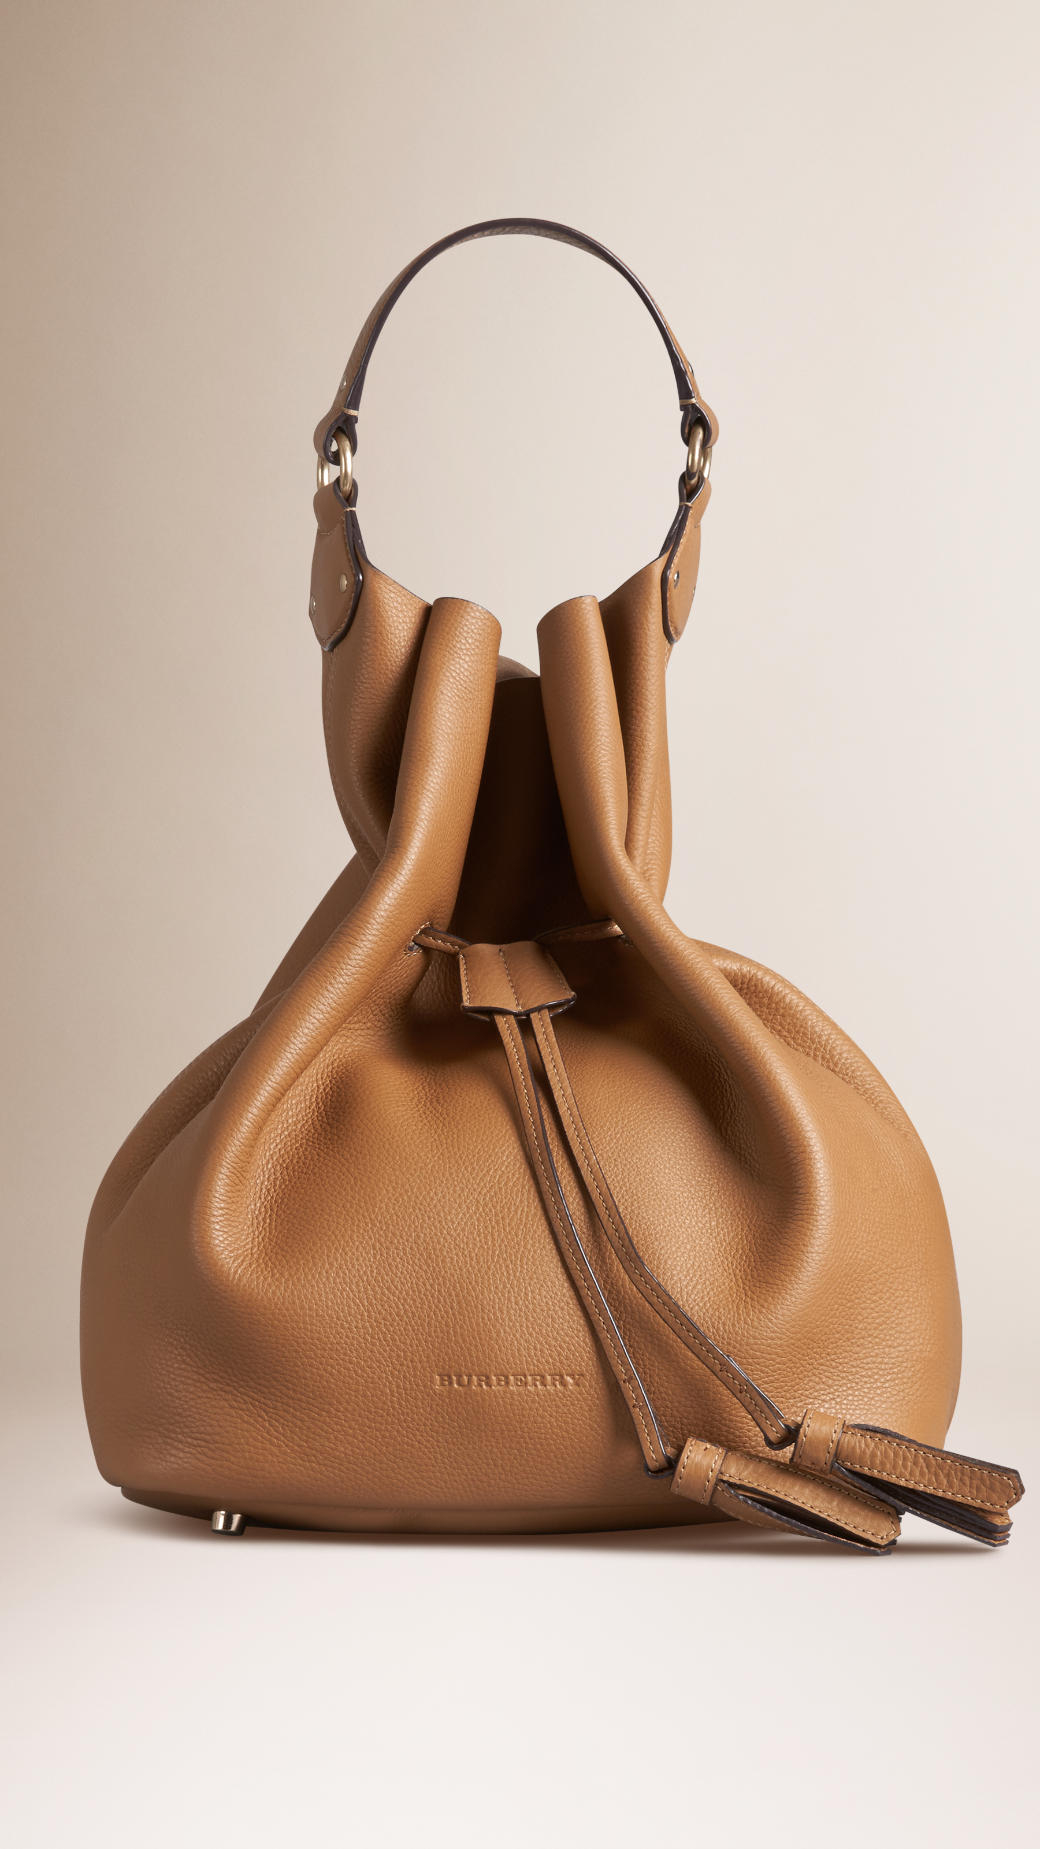 Burberry Large Grainy Leather Hobo Bag in Natural | Lyst